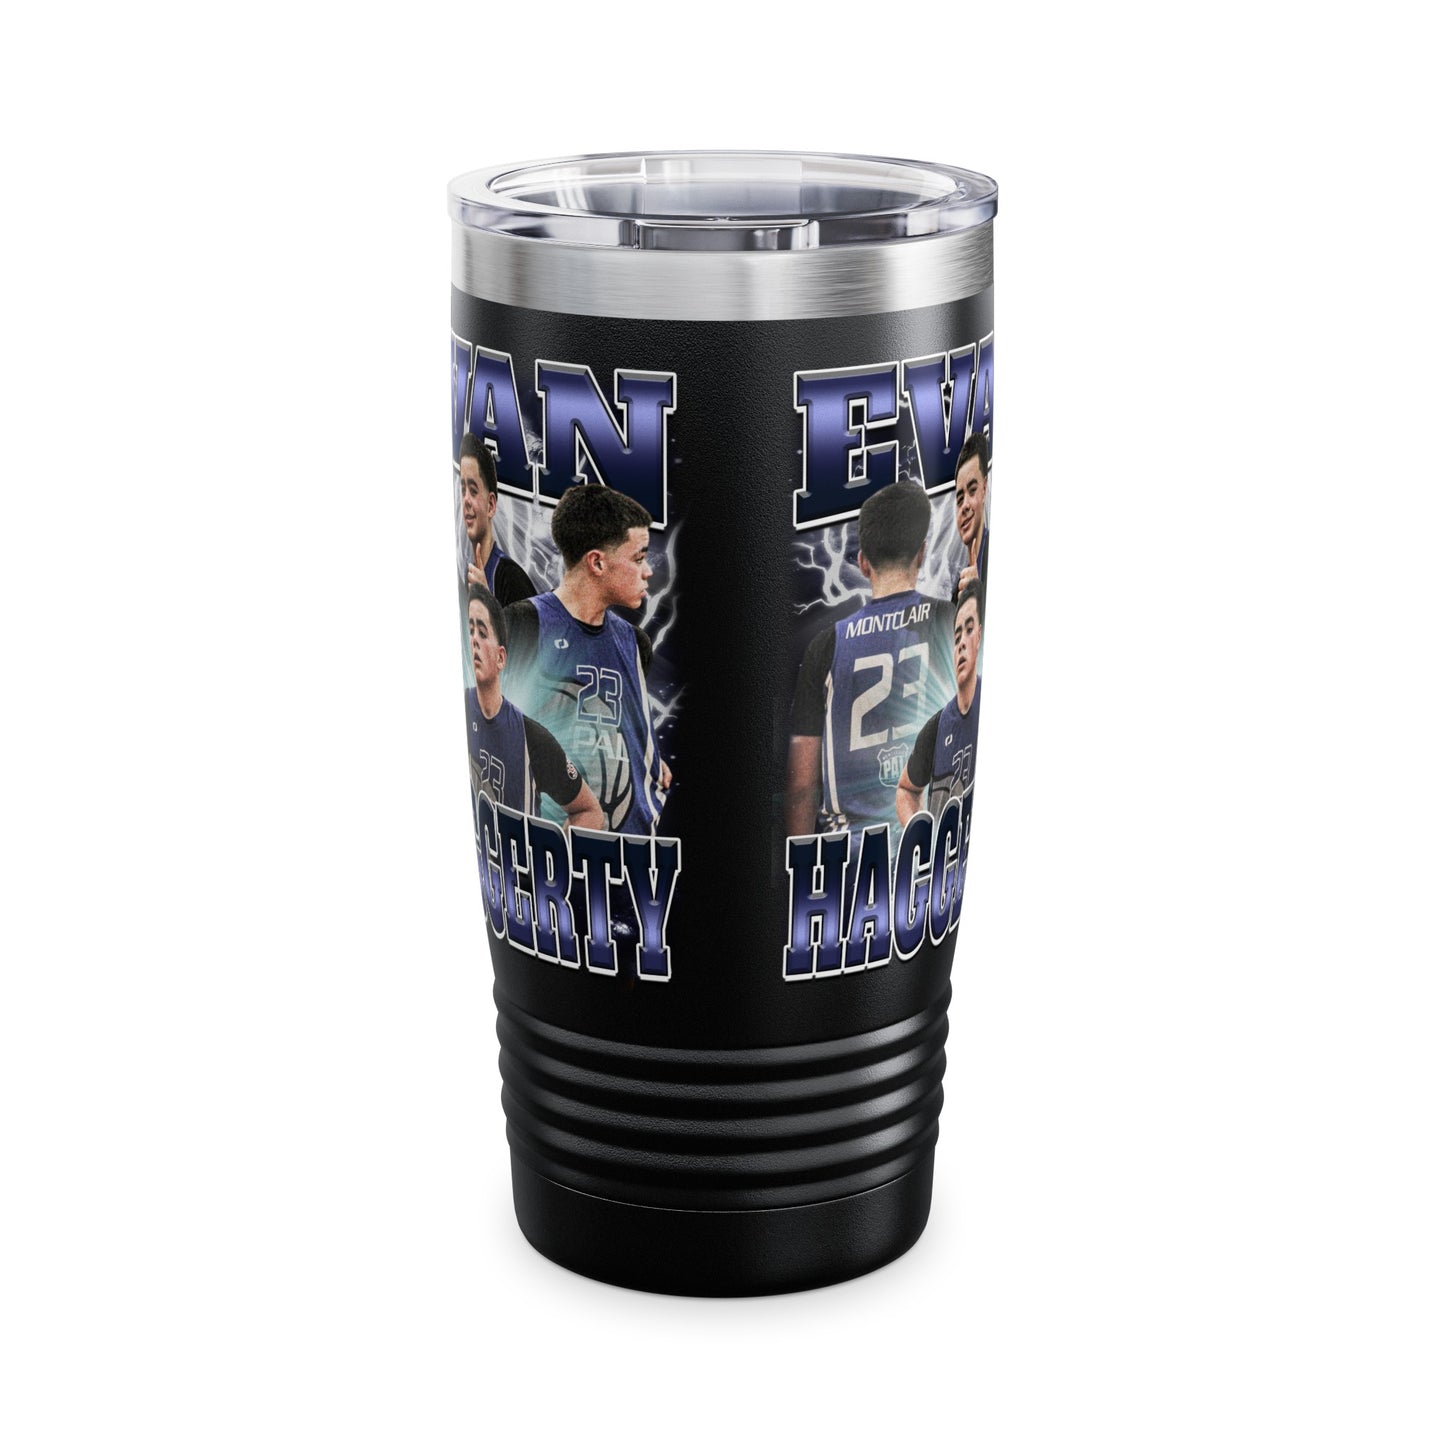 Evan Haggerty Stainless Steal Tumbler